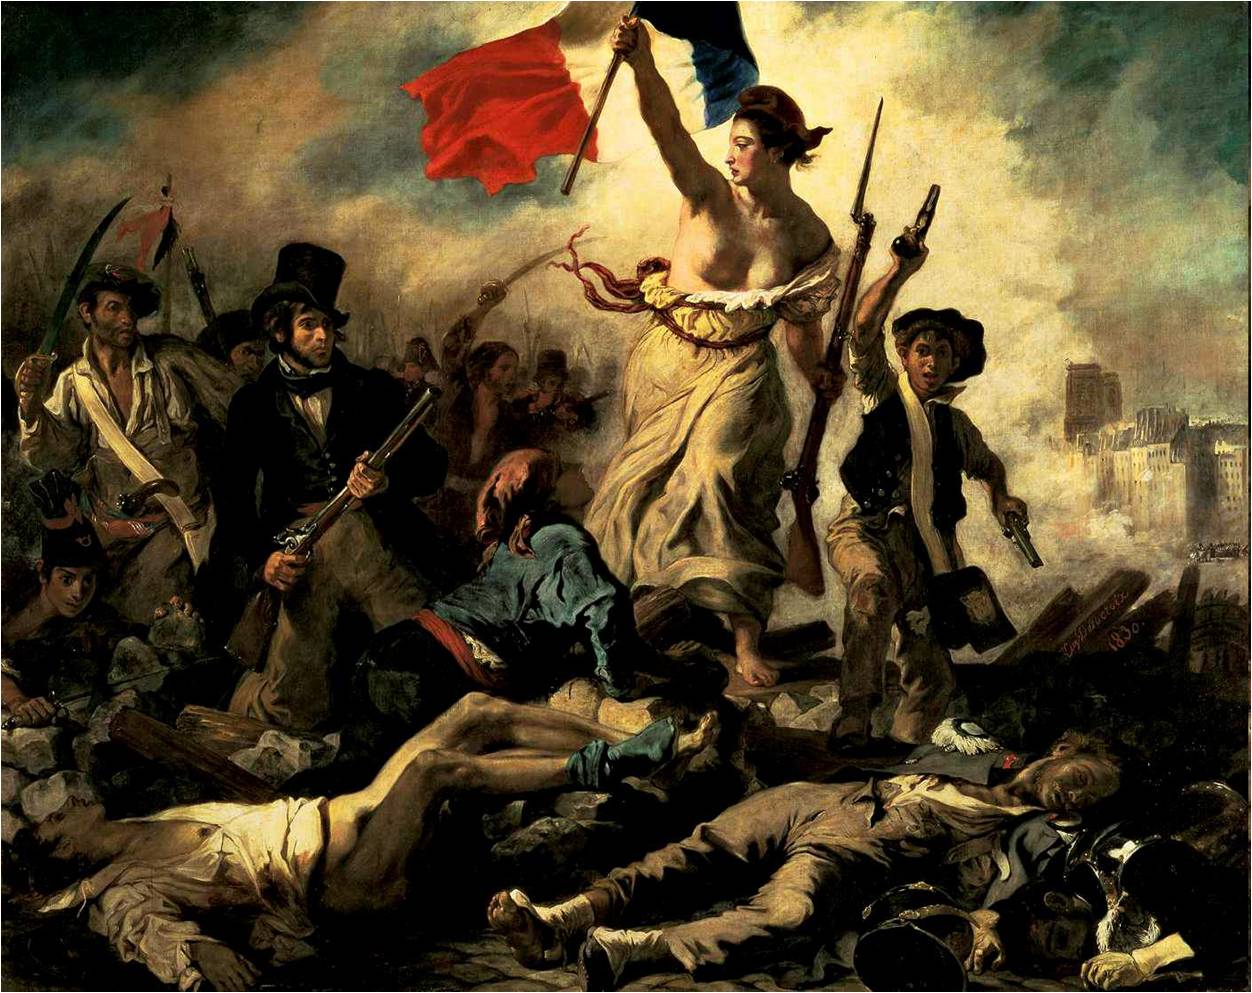 https://uploads4.wikiart.org/images/eugene-delacroix/the-liberty-leading-the-people-1830.jpg